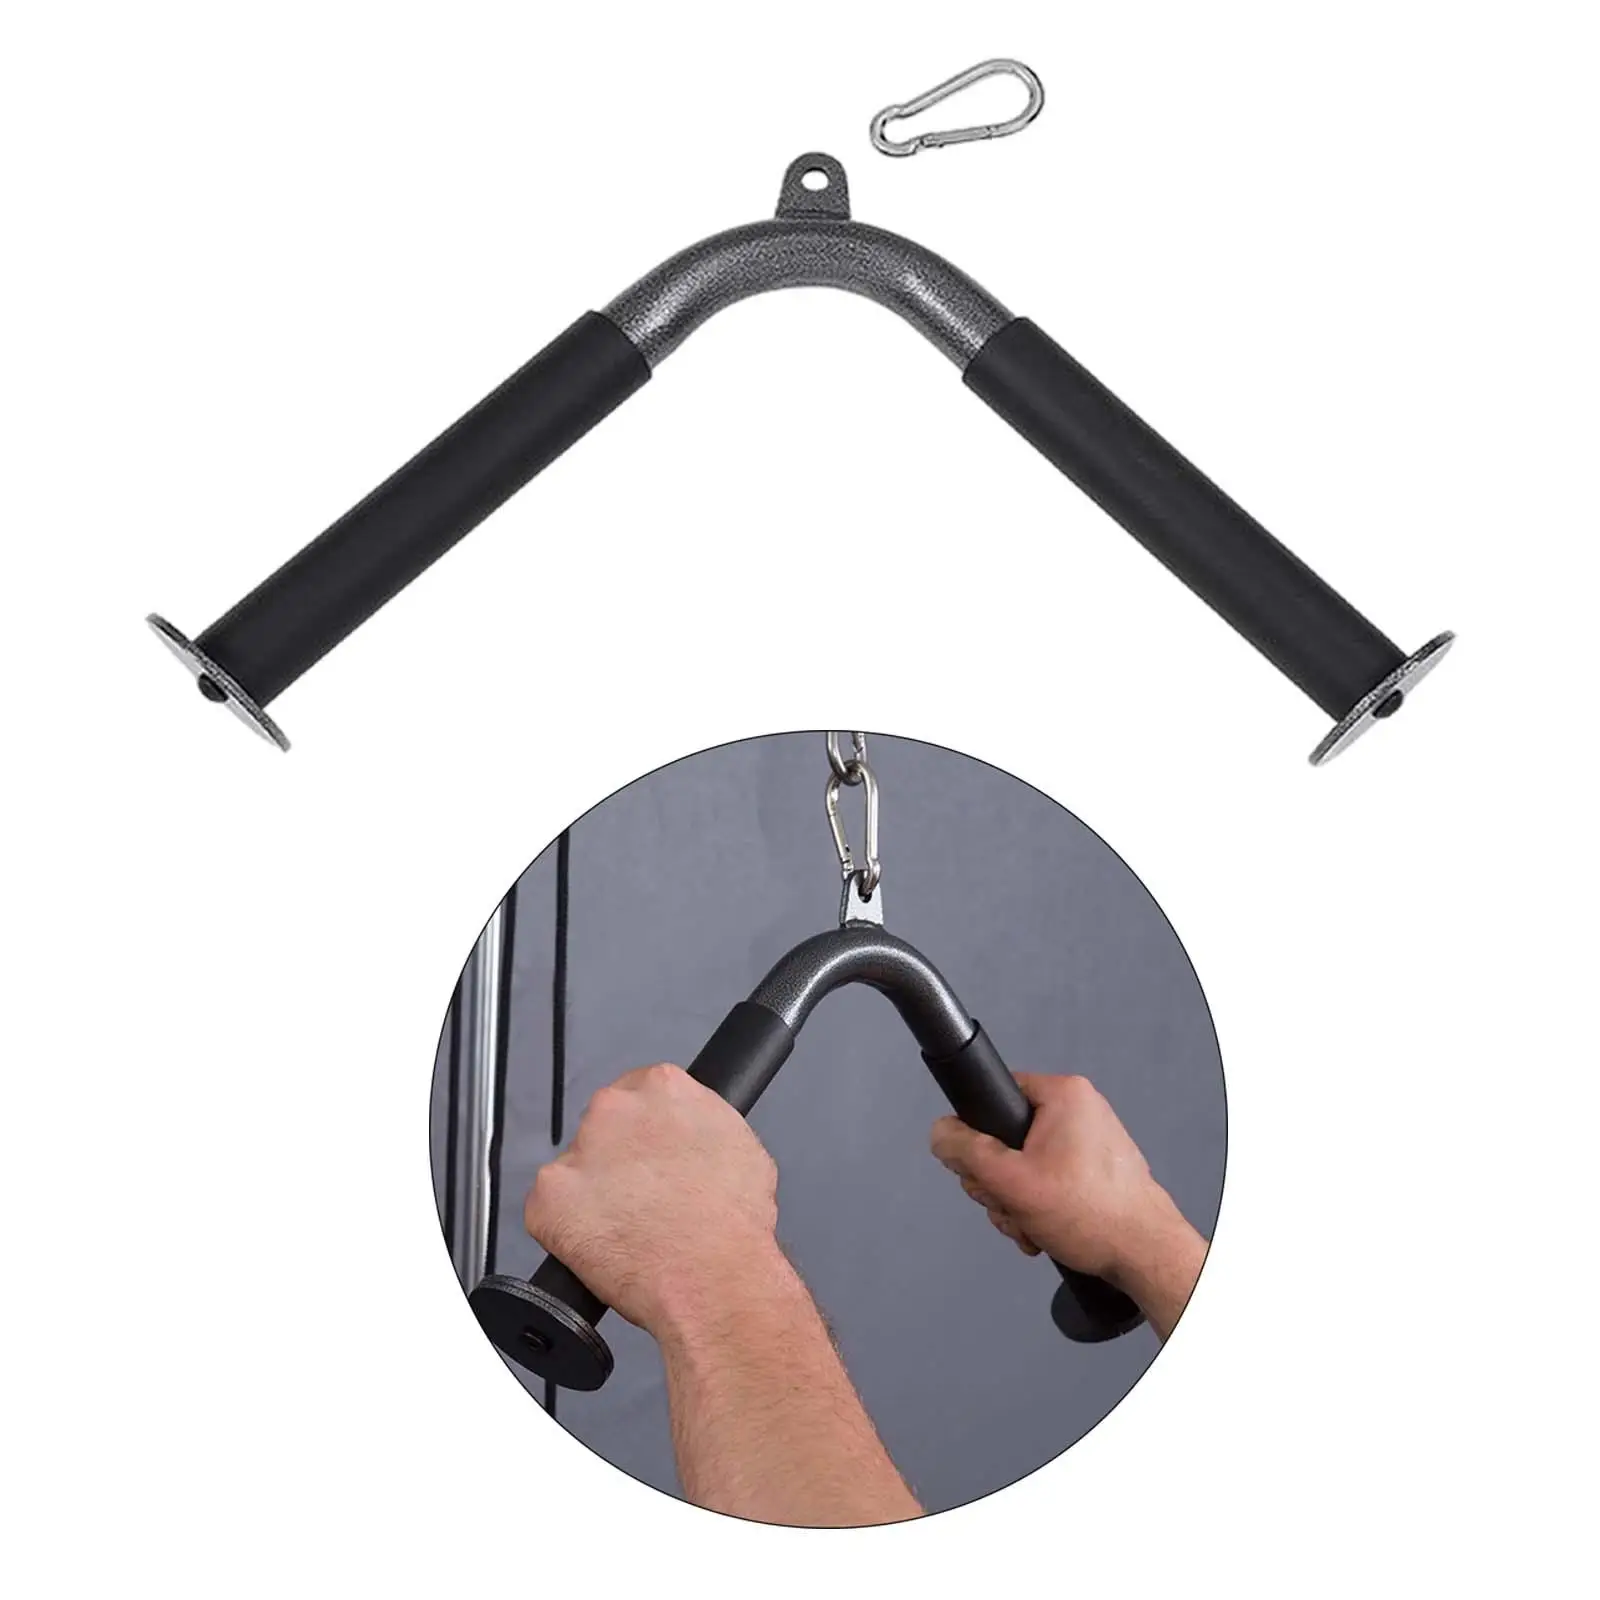 V Shaped Press Down Bar Cable Machine Handle Attachment Double Handle for Home Weight Lifting Exercise Fitness Gym